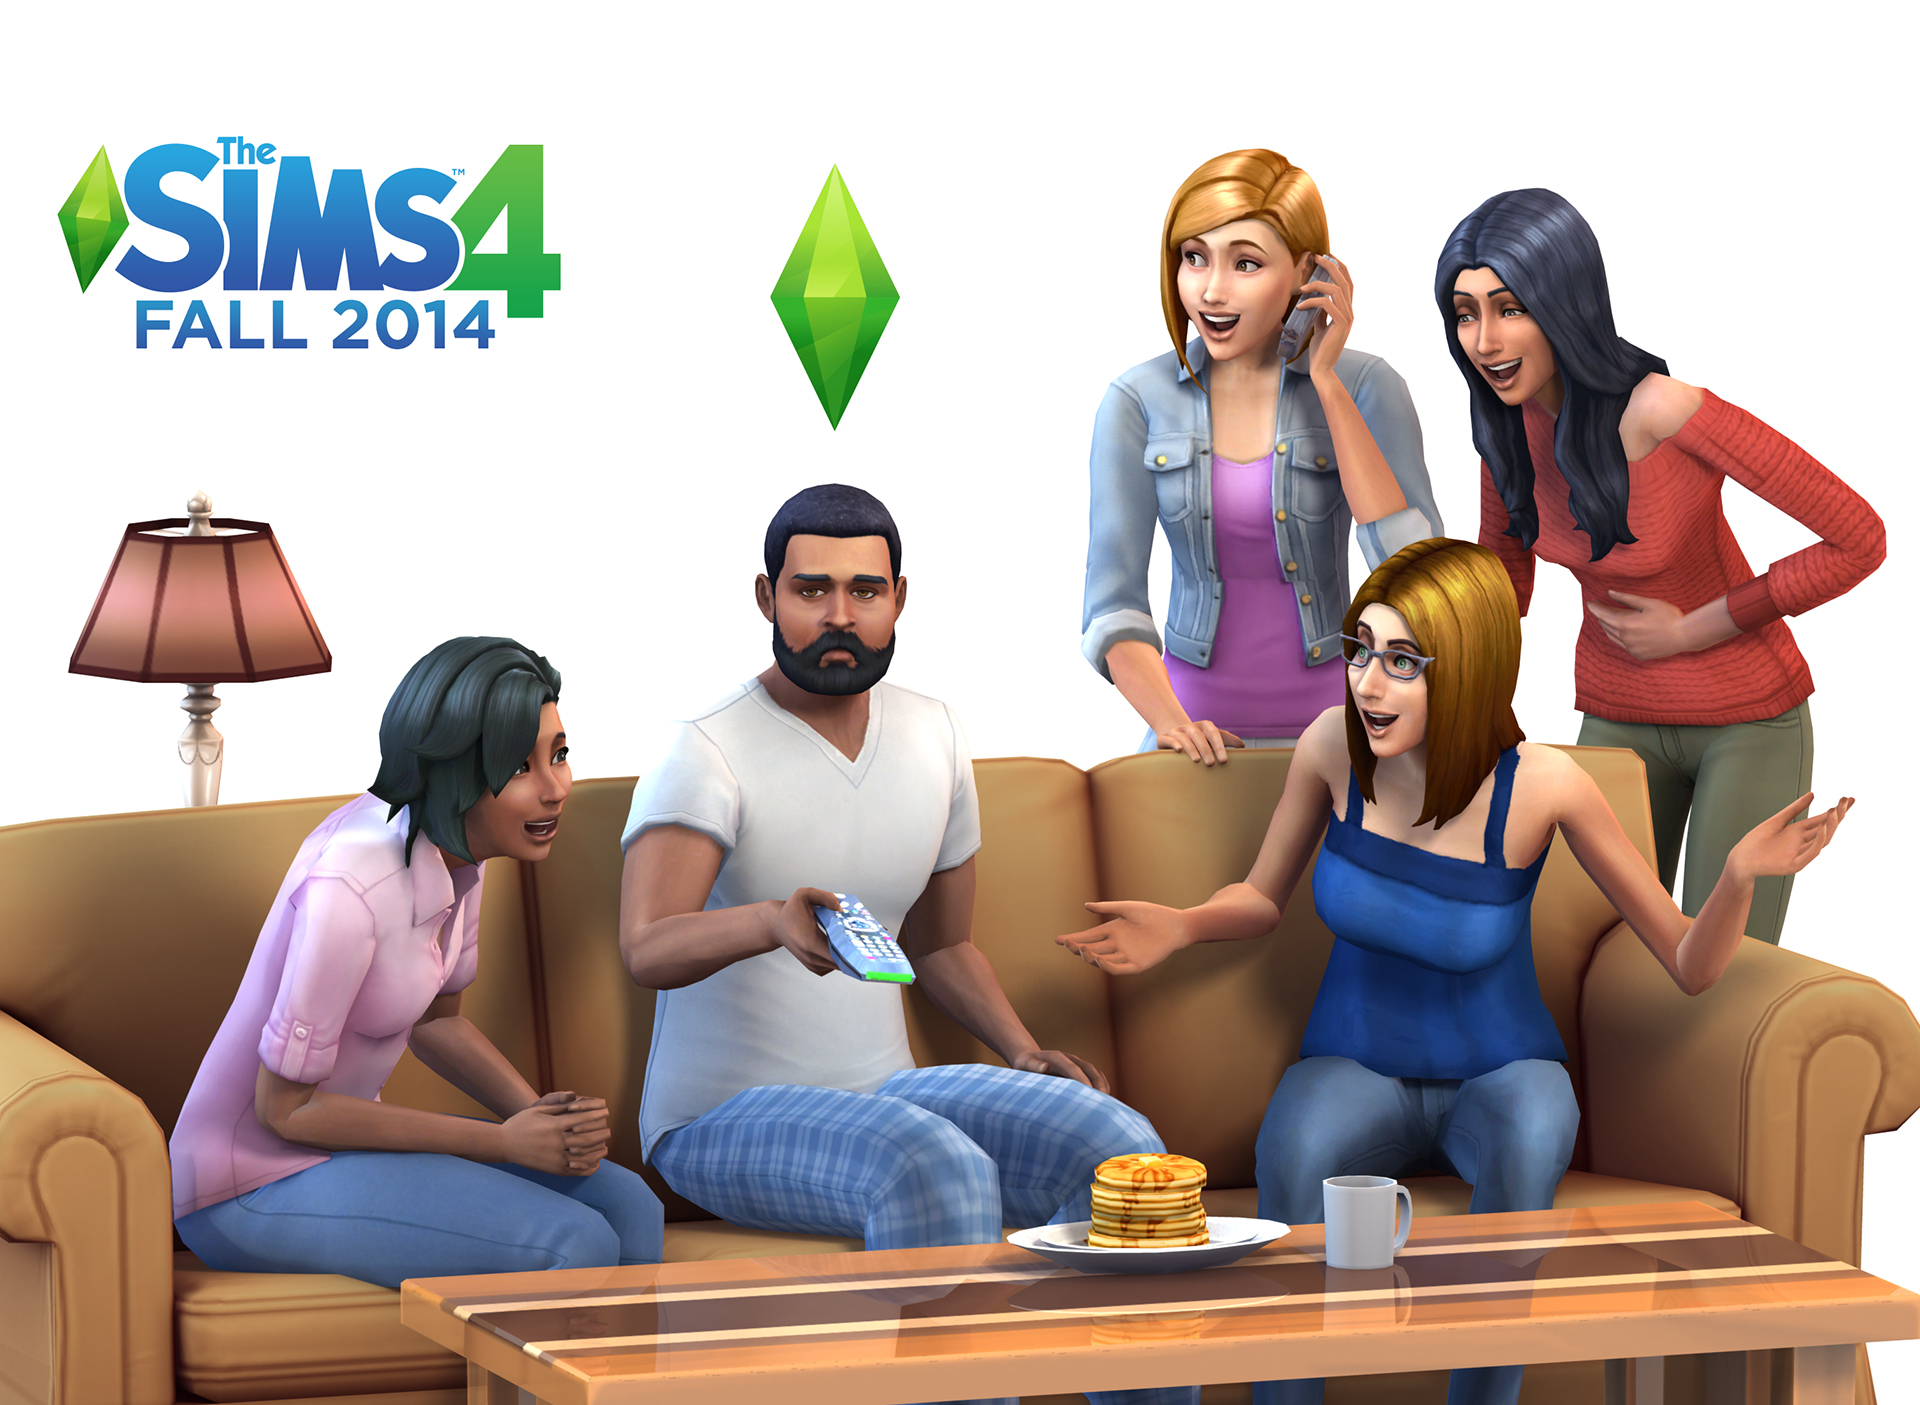 The Sims 4 Fall 2014 Release Annoucement